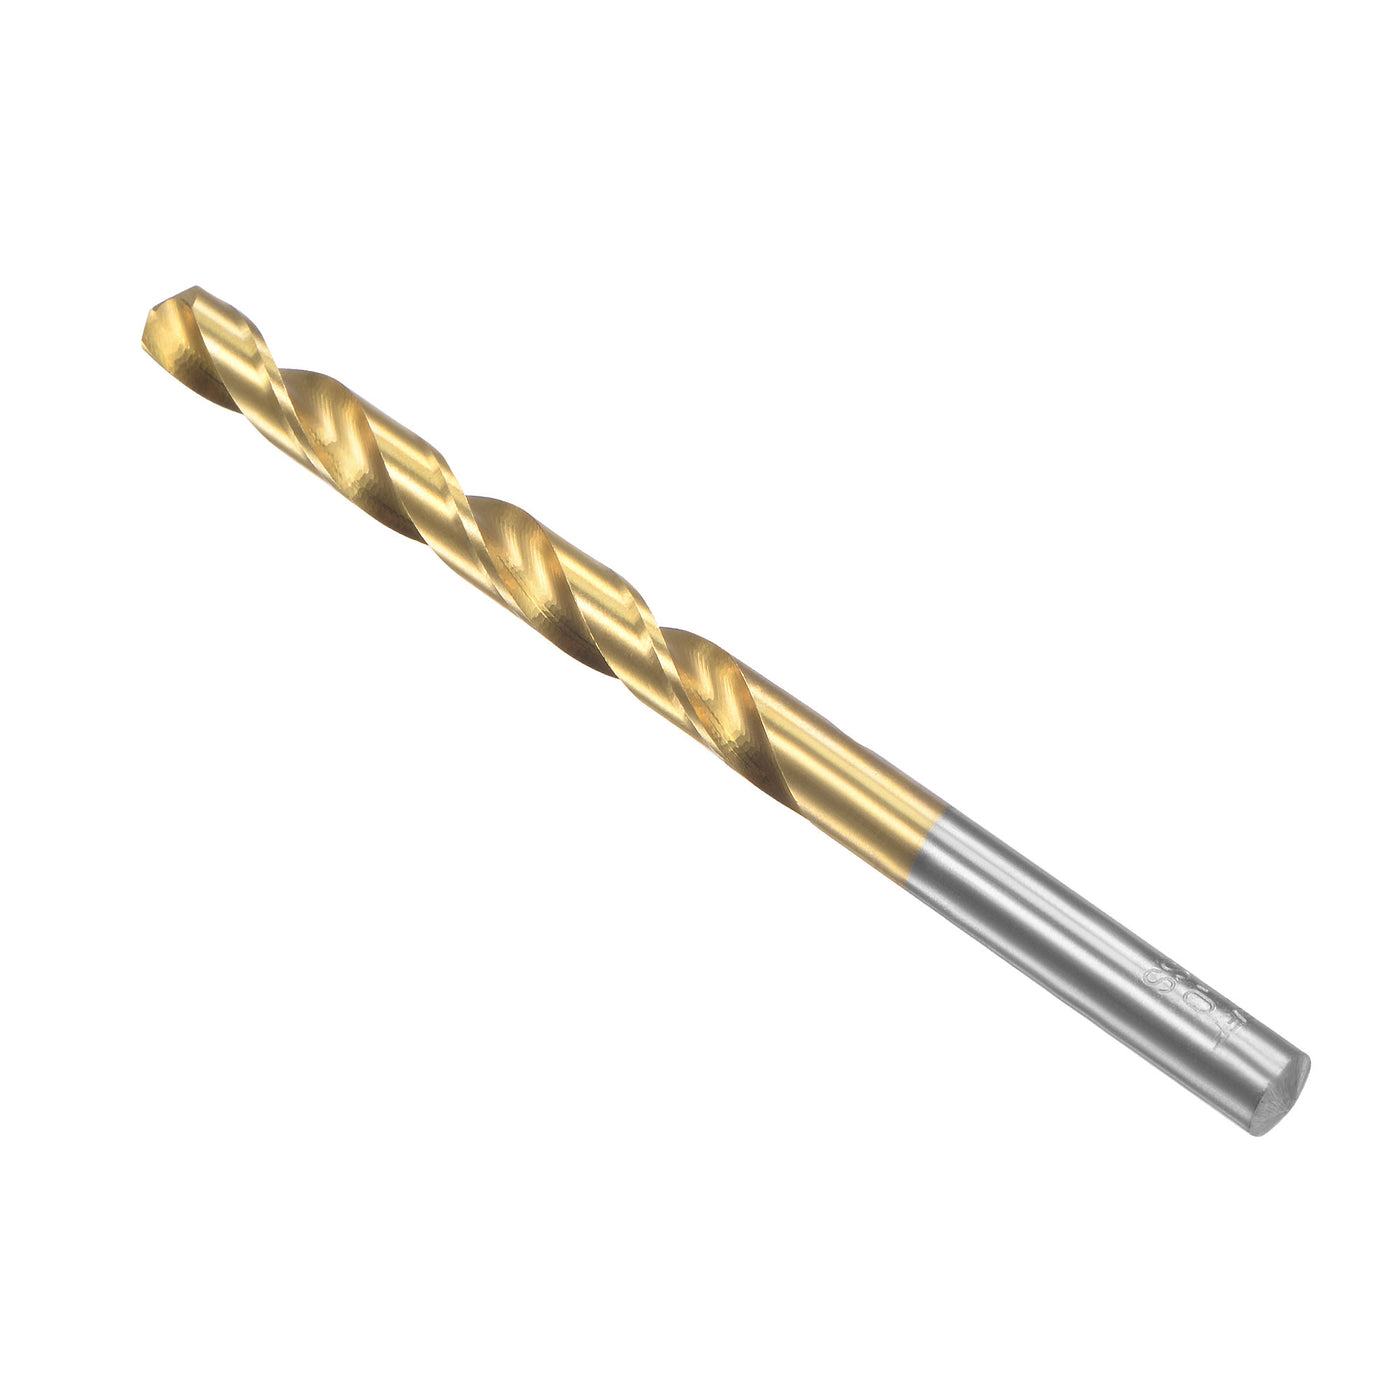 uxcell Uxcell High Speed Steel Twist Drill Bit 7mm Fully Ground Titanium Coated